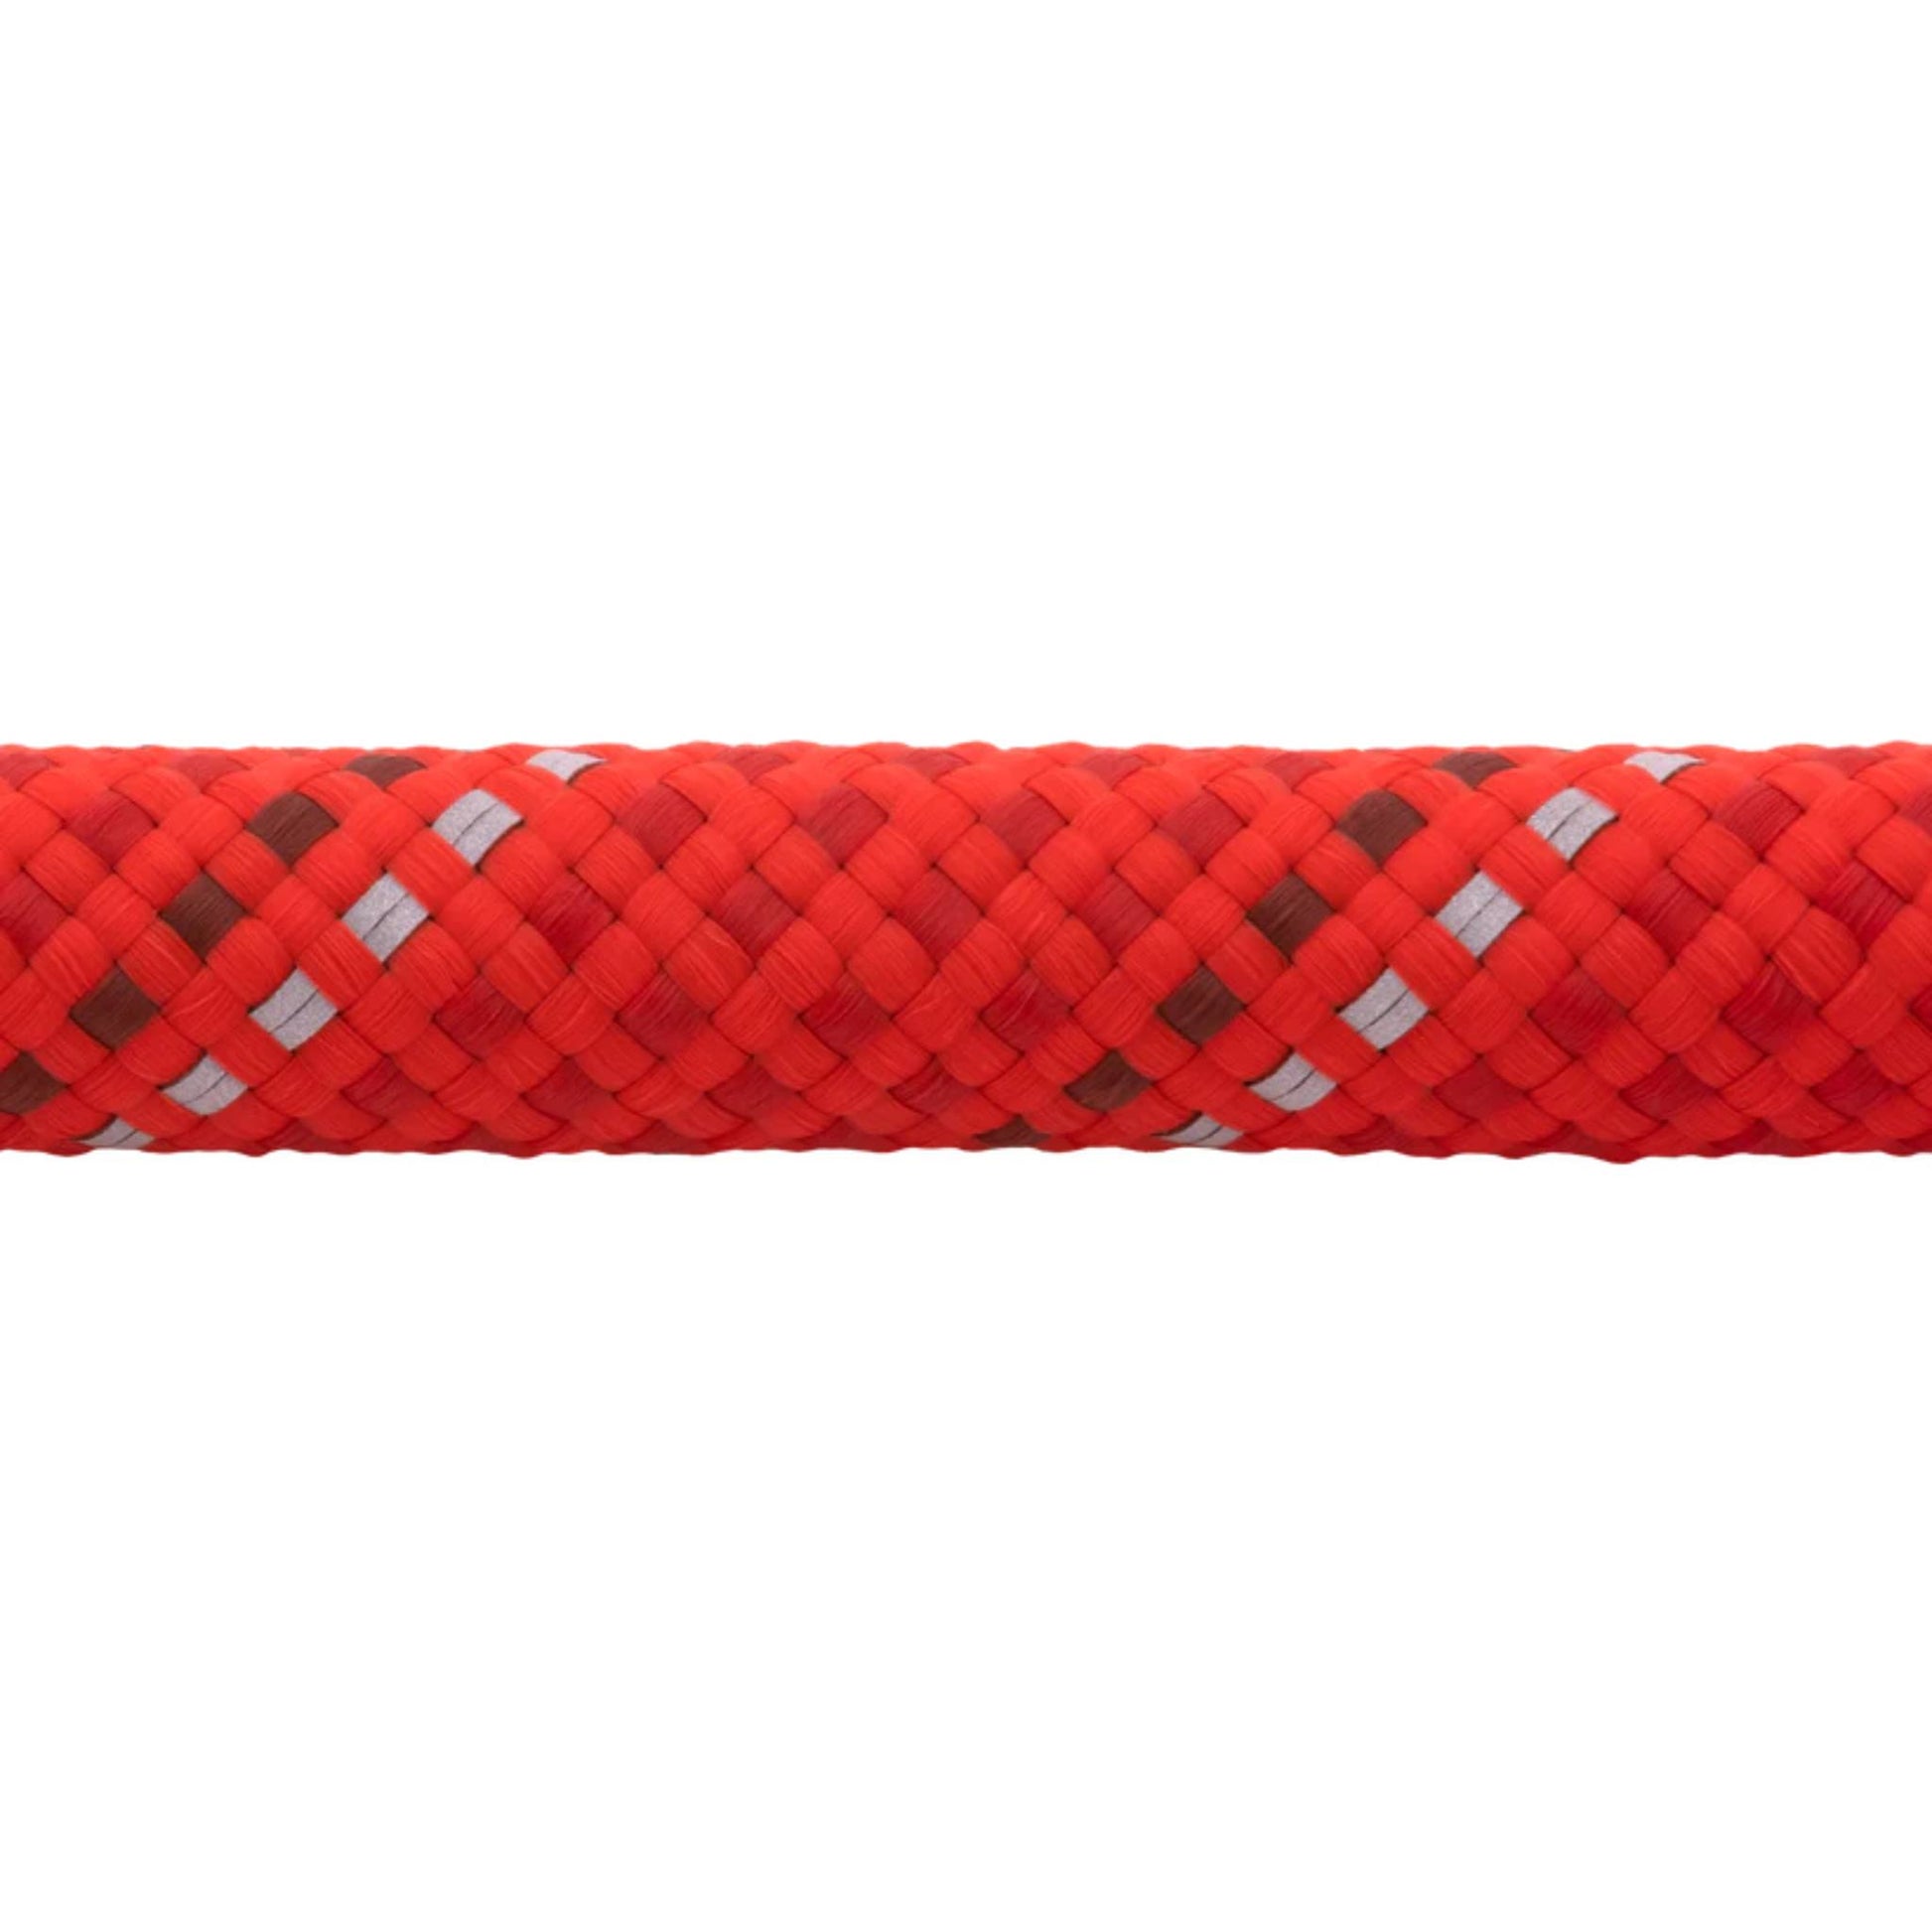 Ruffwear Knot a Long rope dog lead red close up